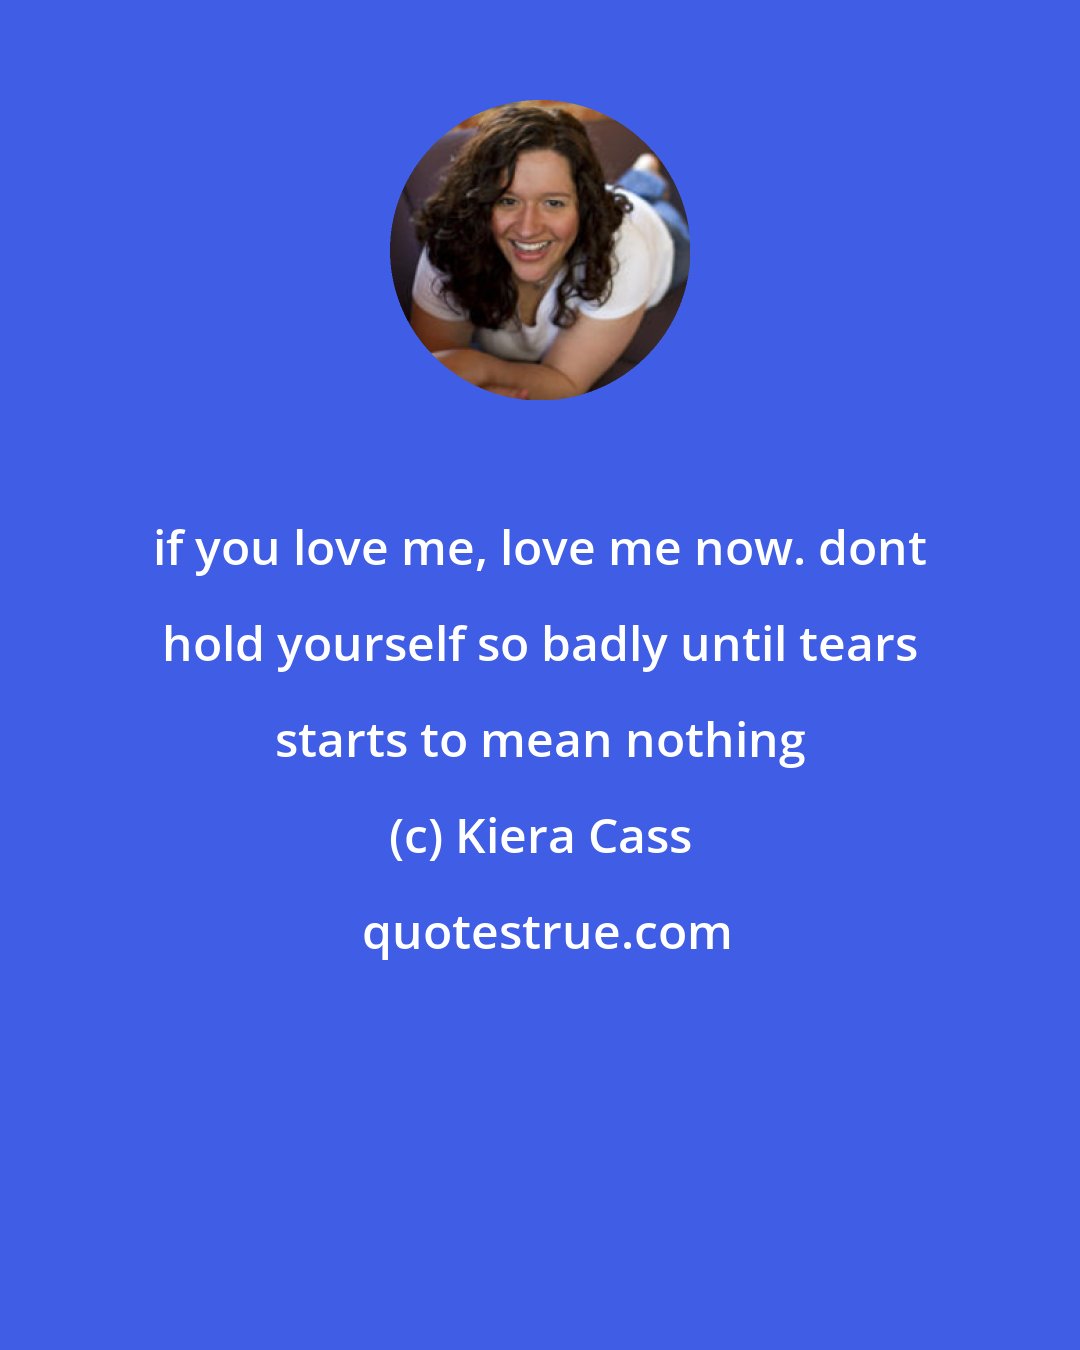 Kiera Cass: if you love me, love me now. dont hold yourself so badly until tears starts to mean nothing